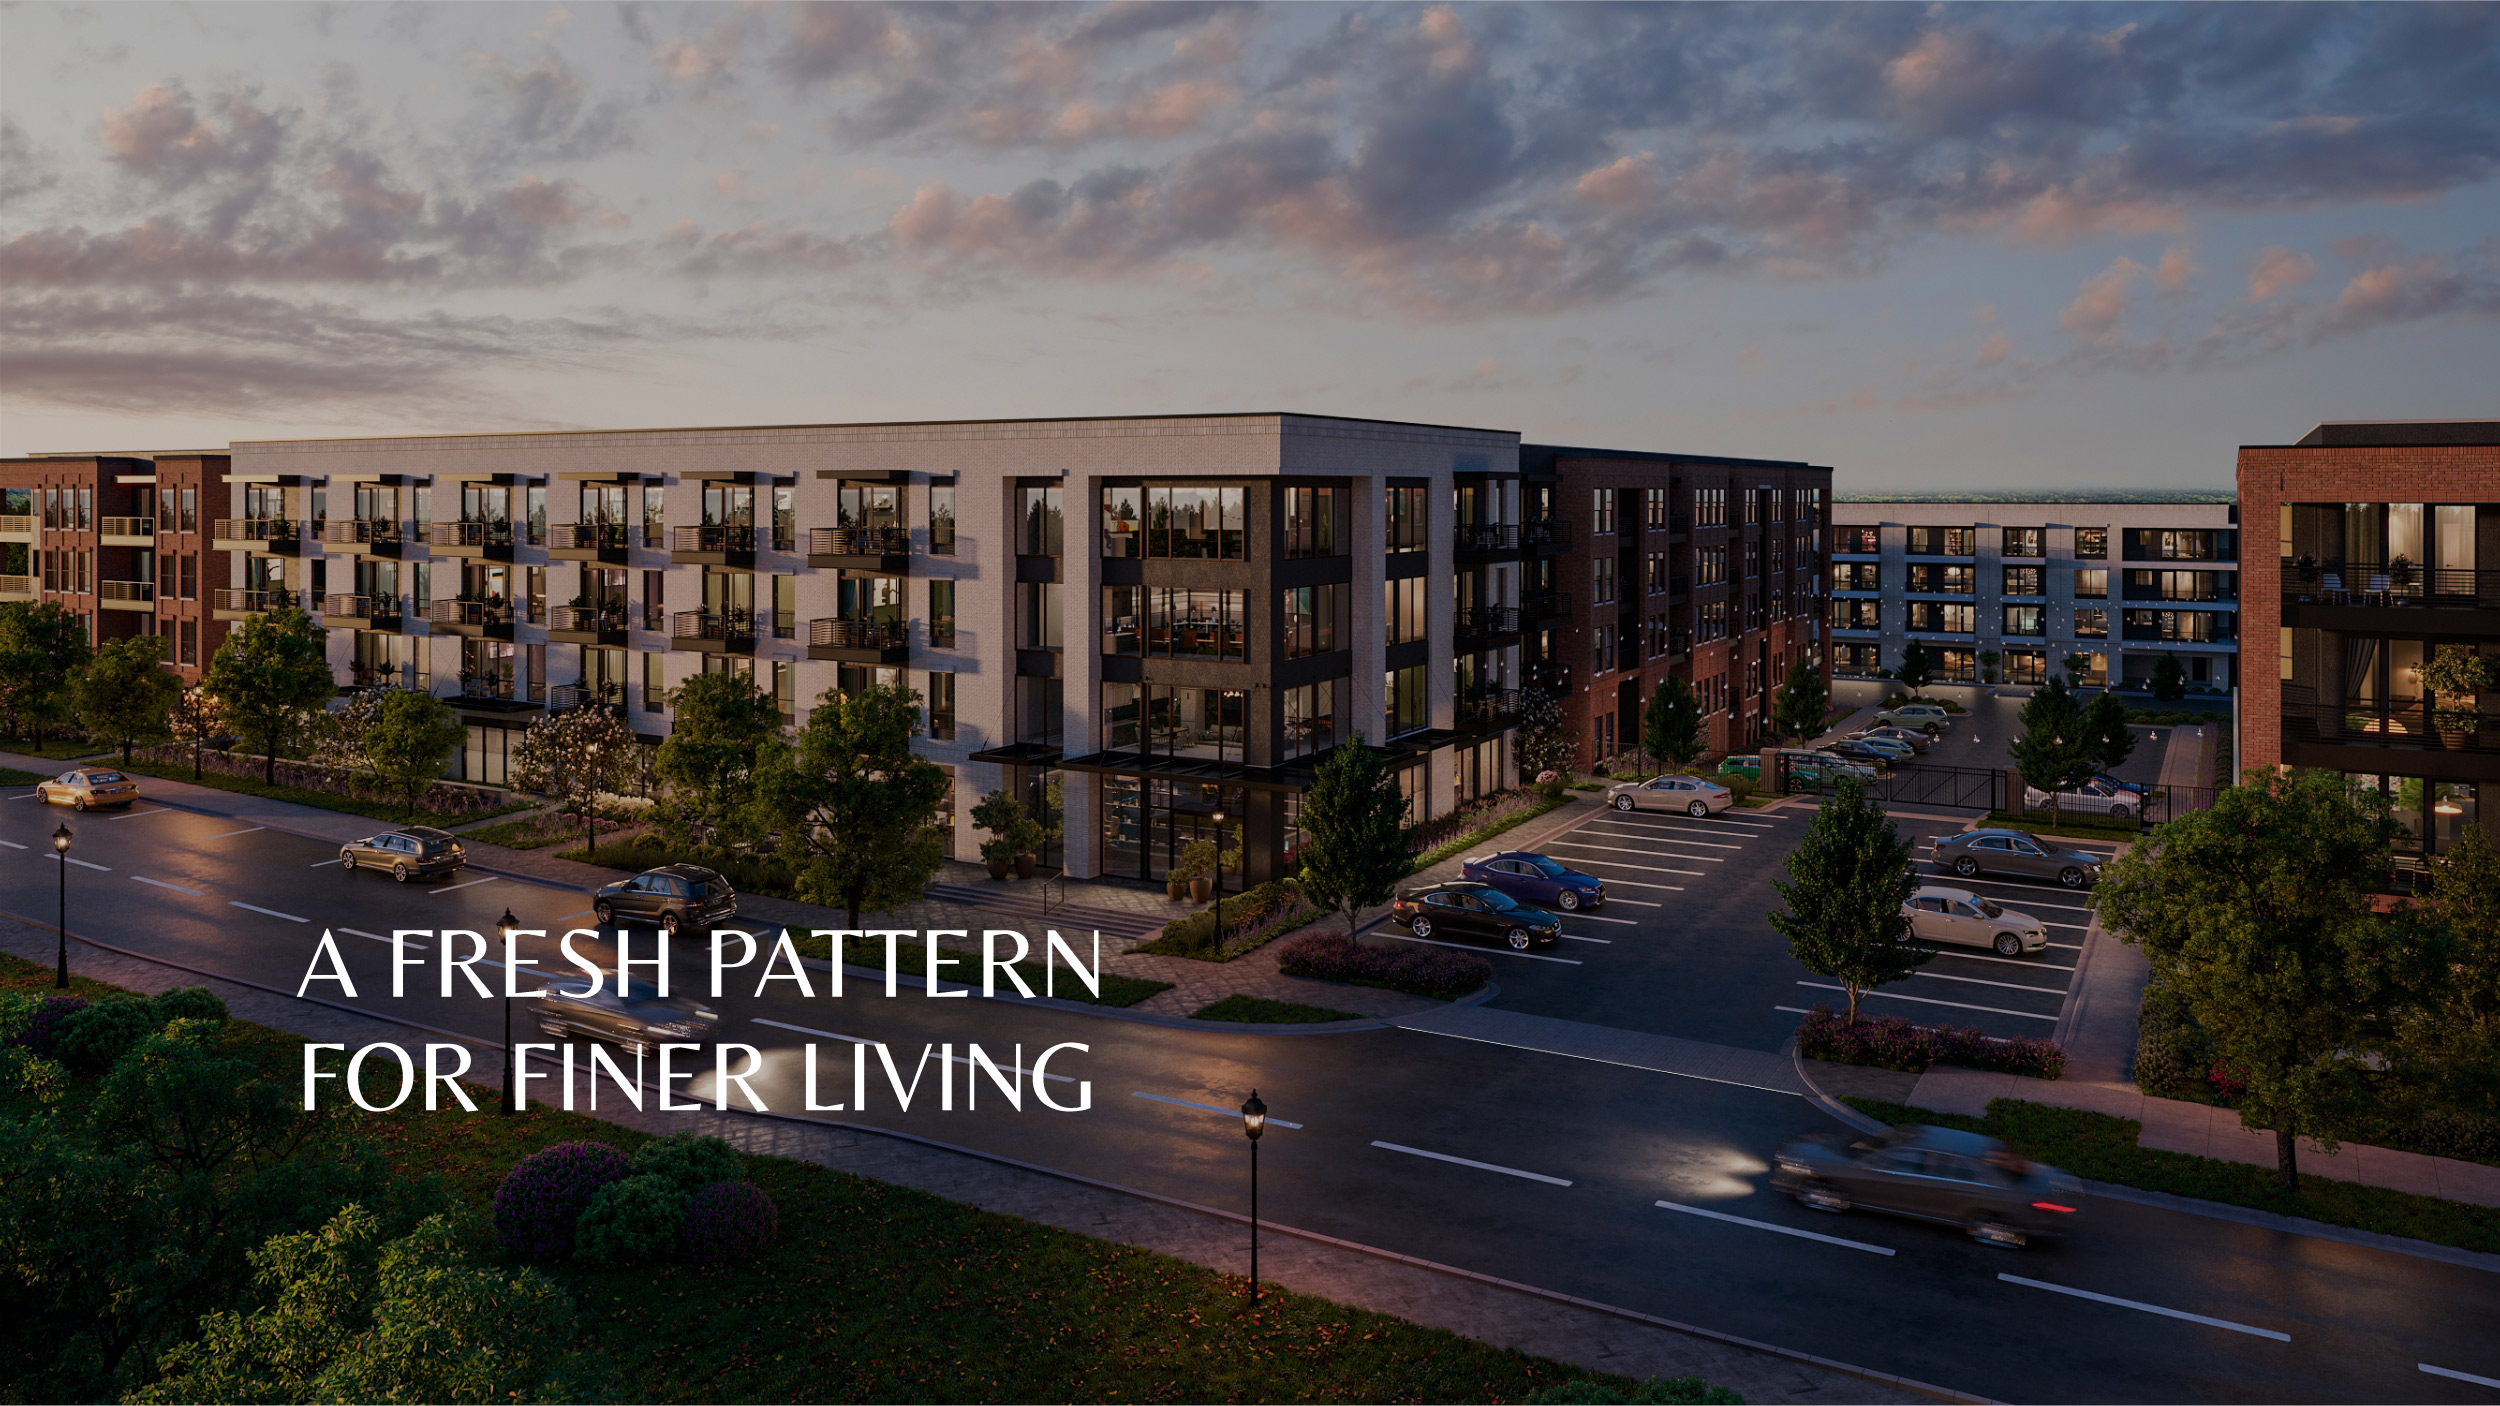 Building exterior. Text: A fresh pattern for finer living.